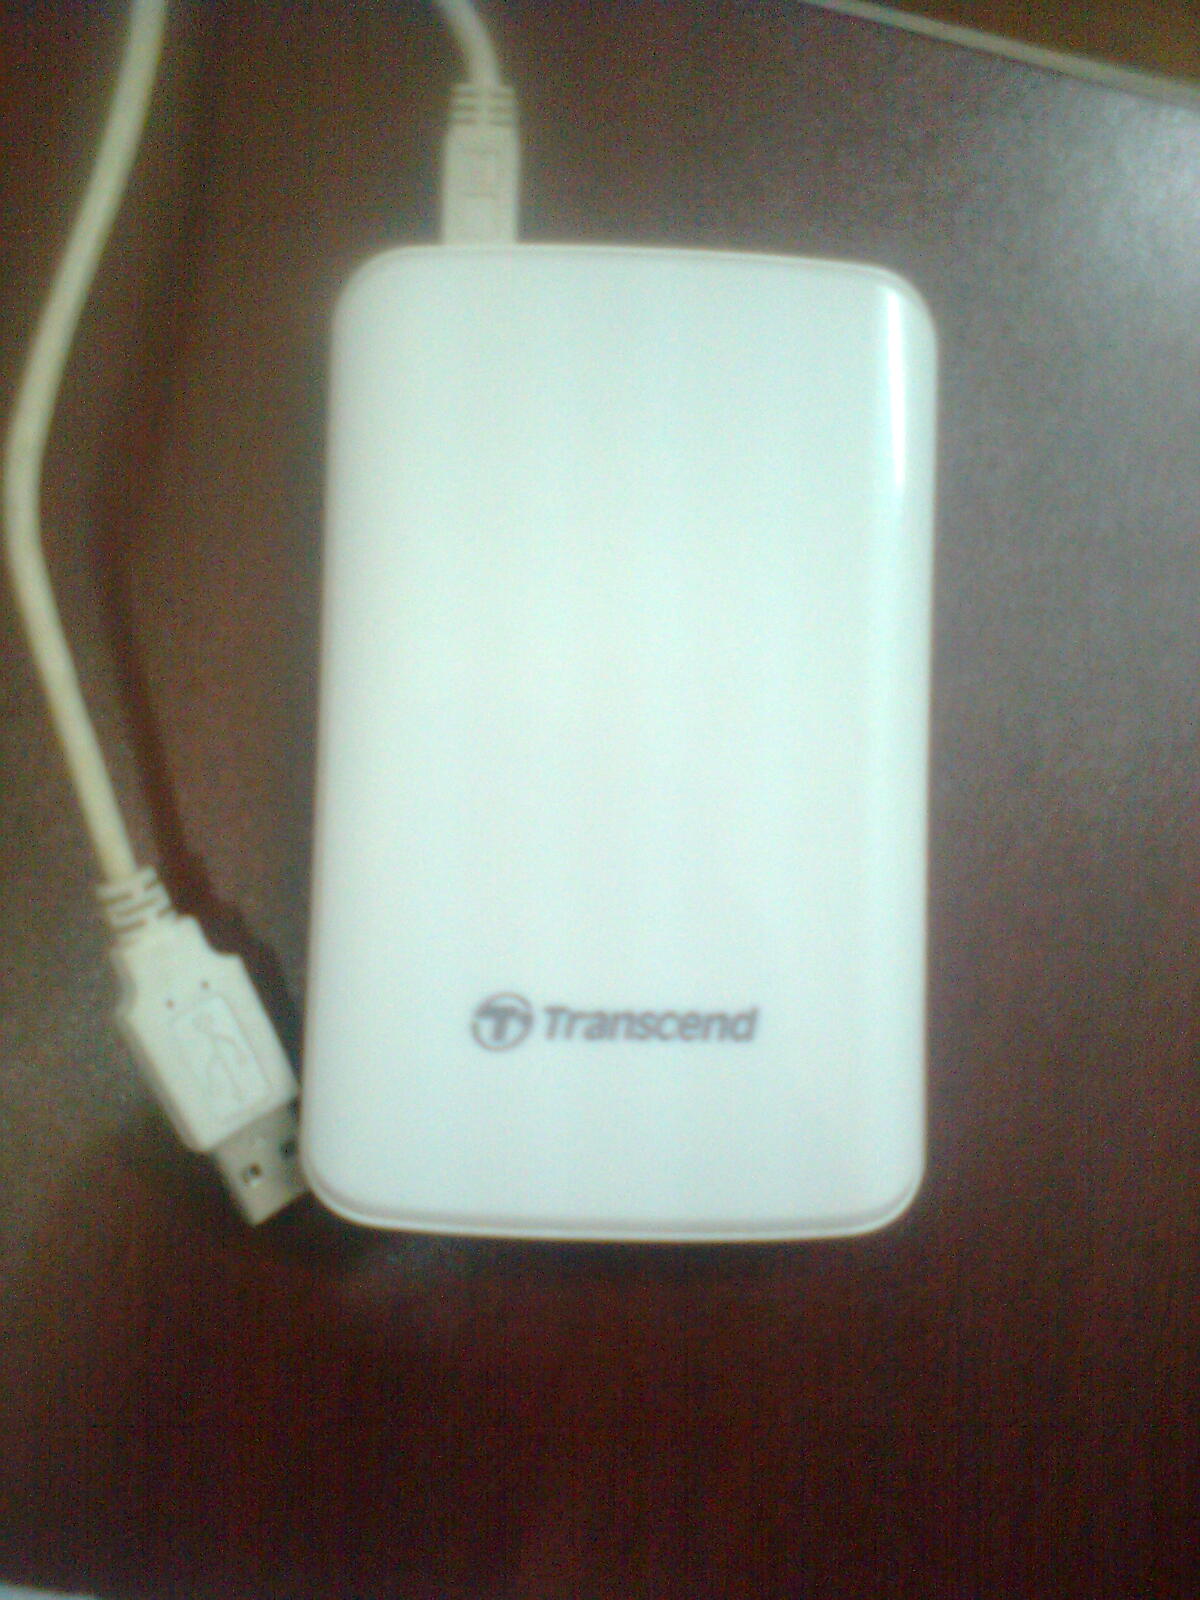 Second Hand Transcend 500 GB Portable Hard Drive large image 0